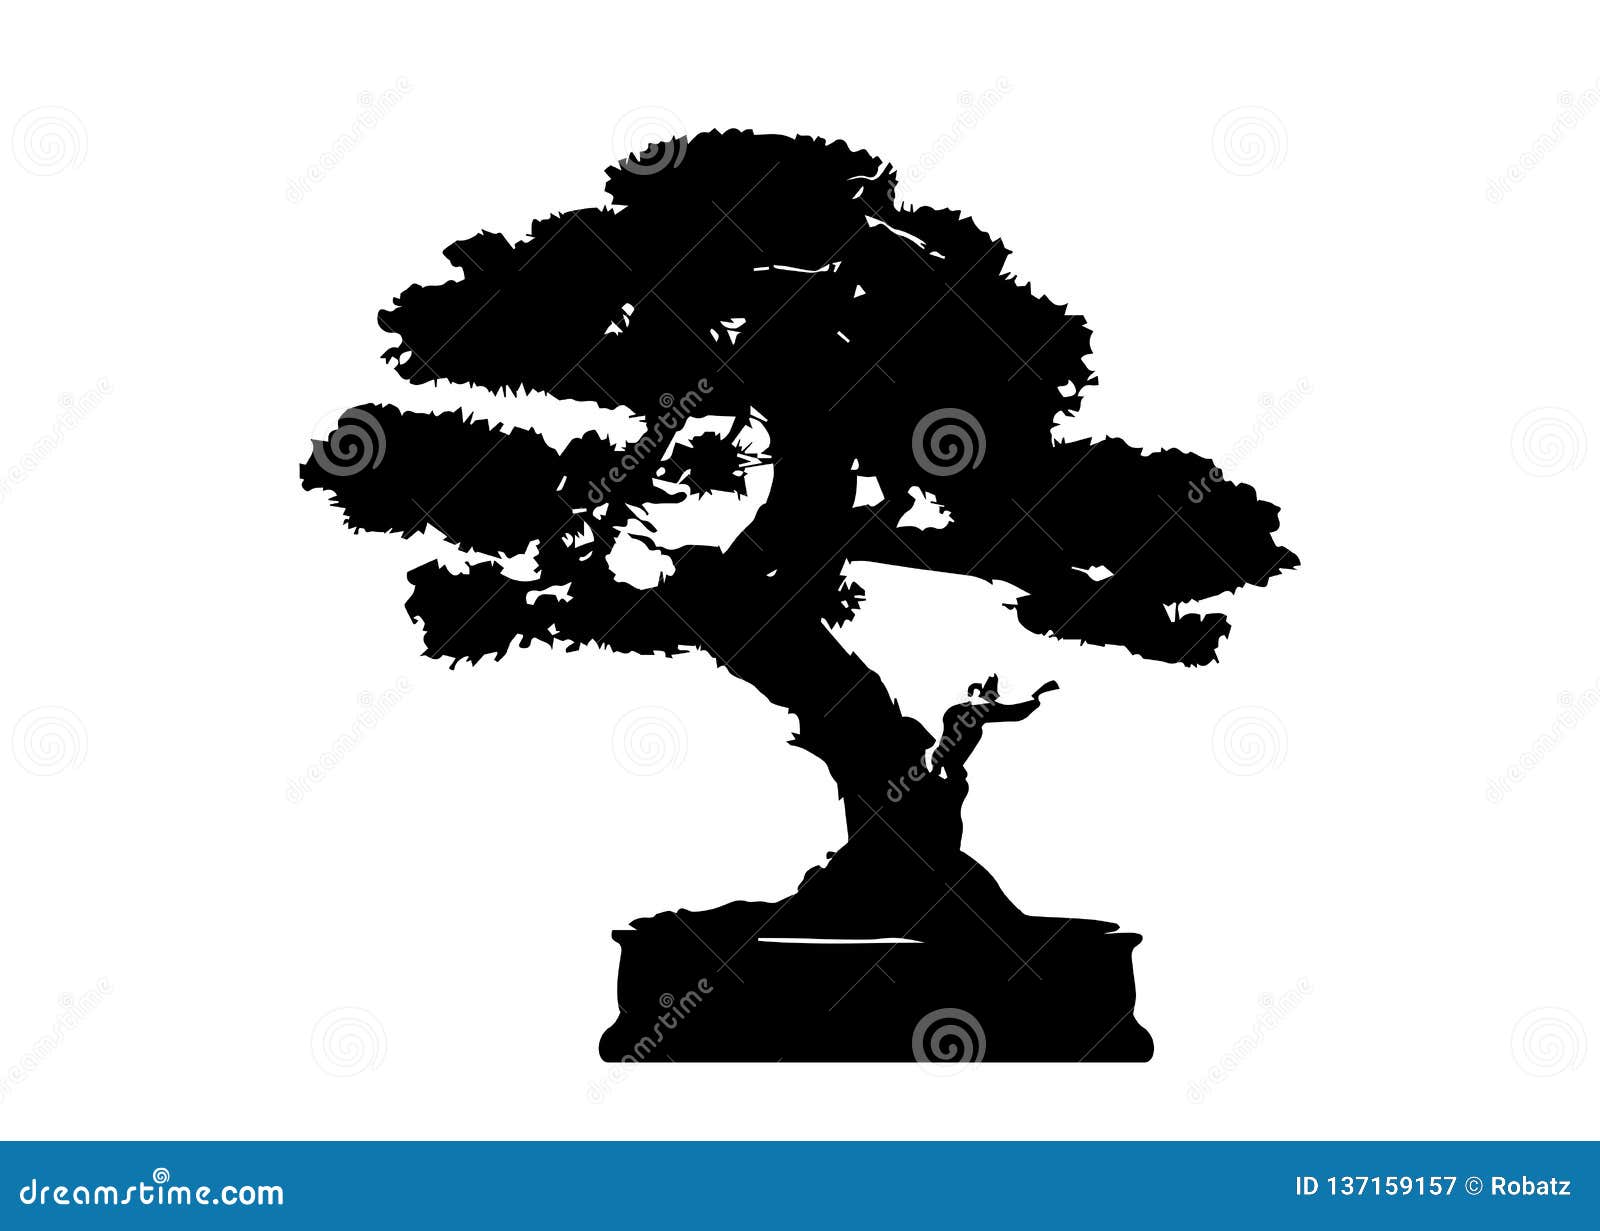 Japanese Bonsai Tree Plant Silhouette Icons On White Background Black Silhouette Of Bonsai Detailed Image Vector Isolated Stock Vector Illustration Of Decoration Fish 137159157